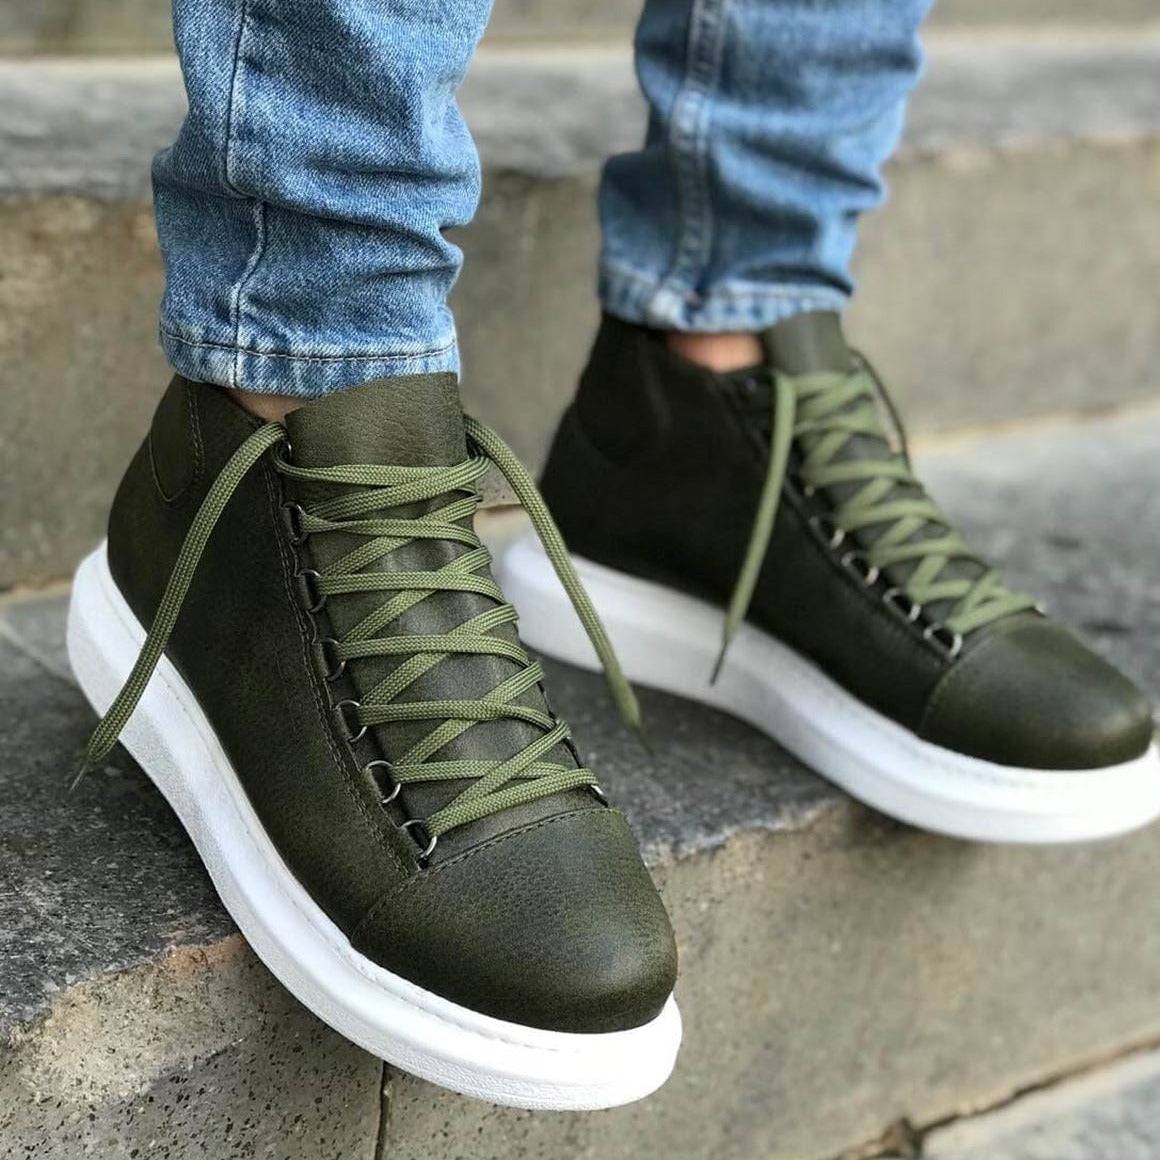 High Top Platform Sneakers for Women by Apollo | Kelly in Verdant Allure